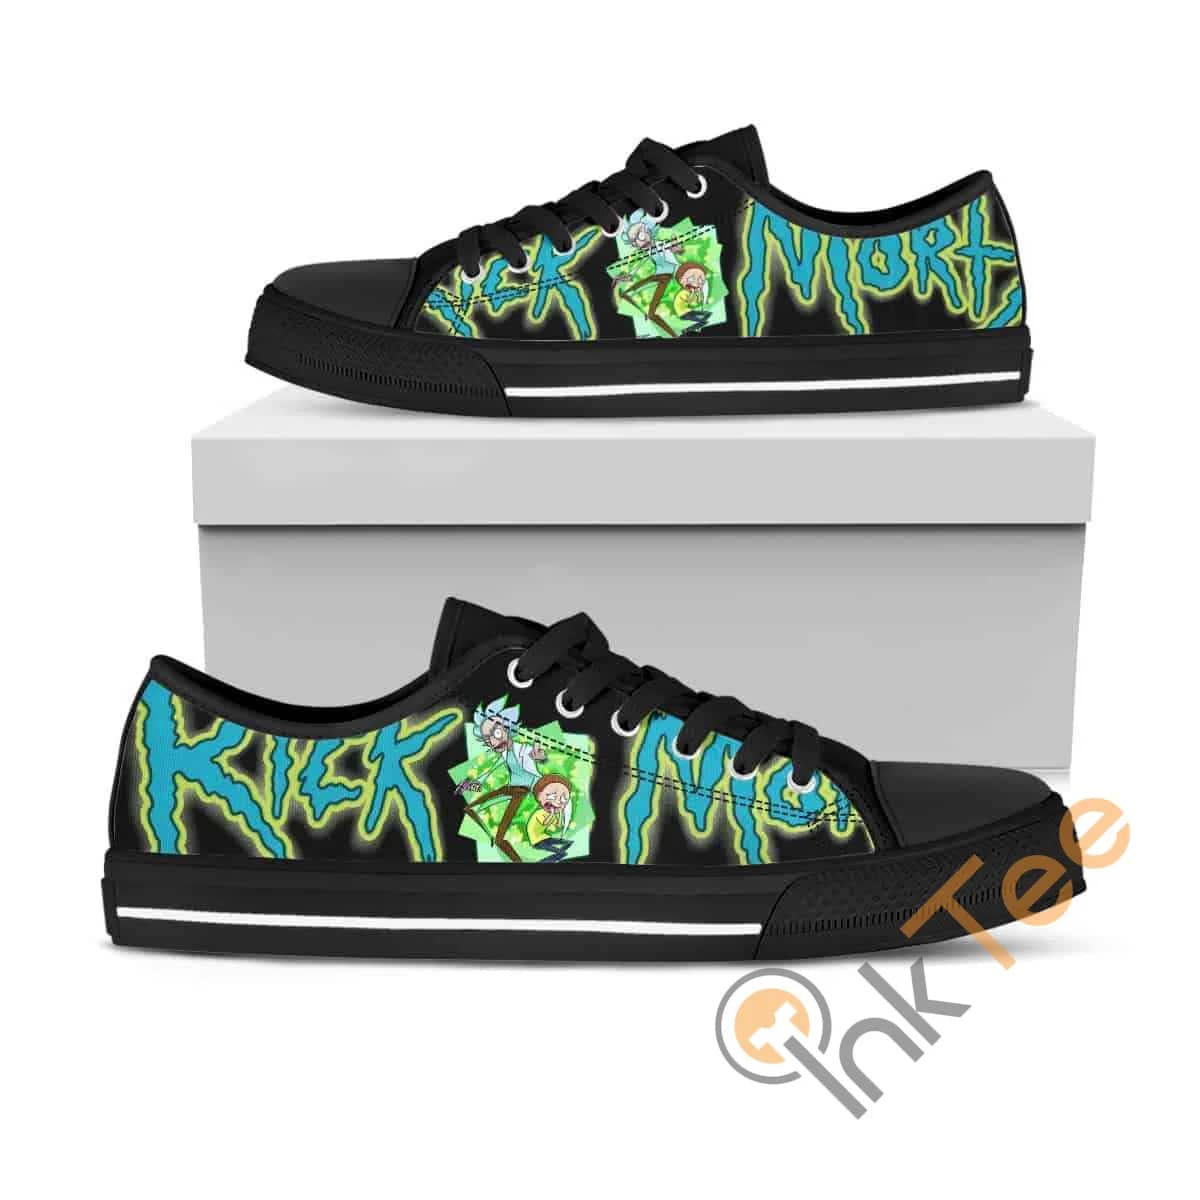 Rick And Morty Ha06 Low Top Shoes